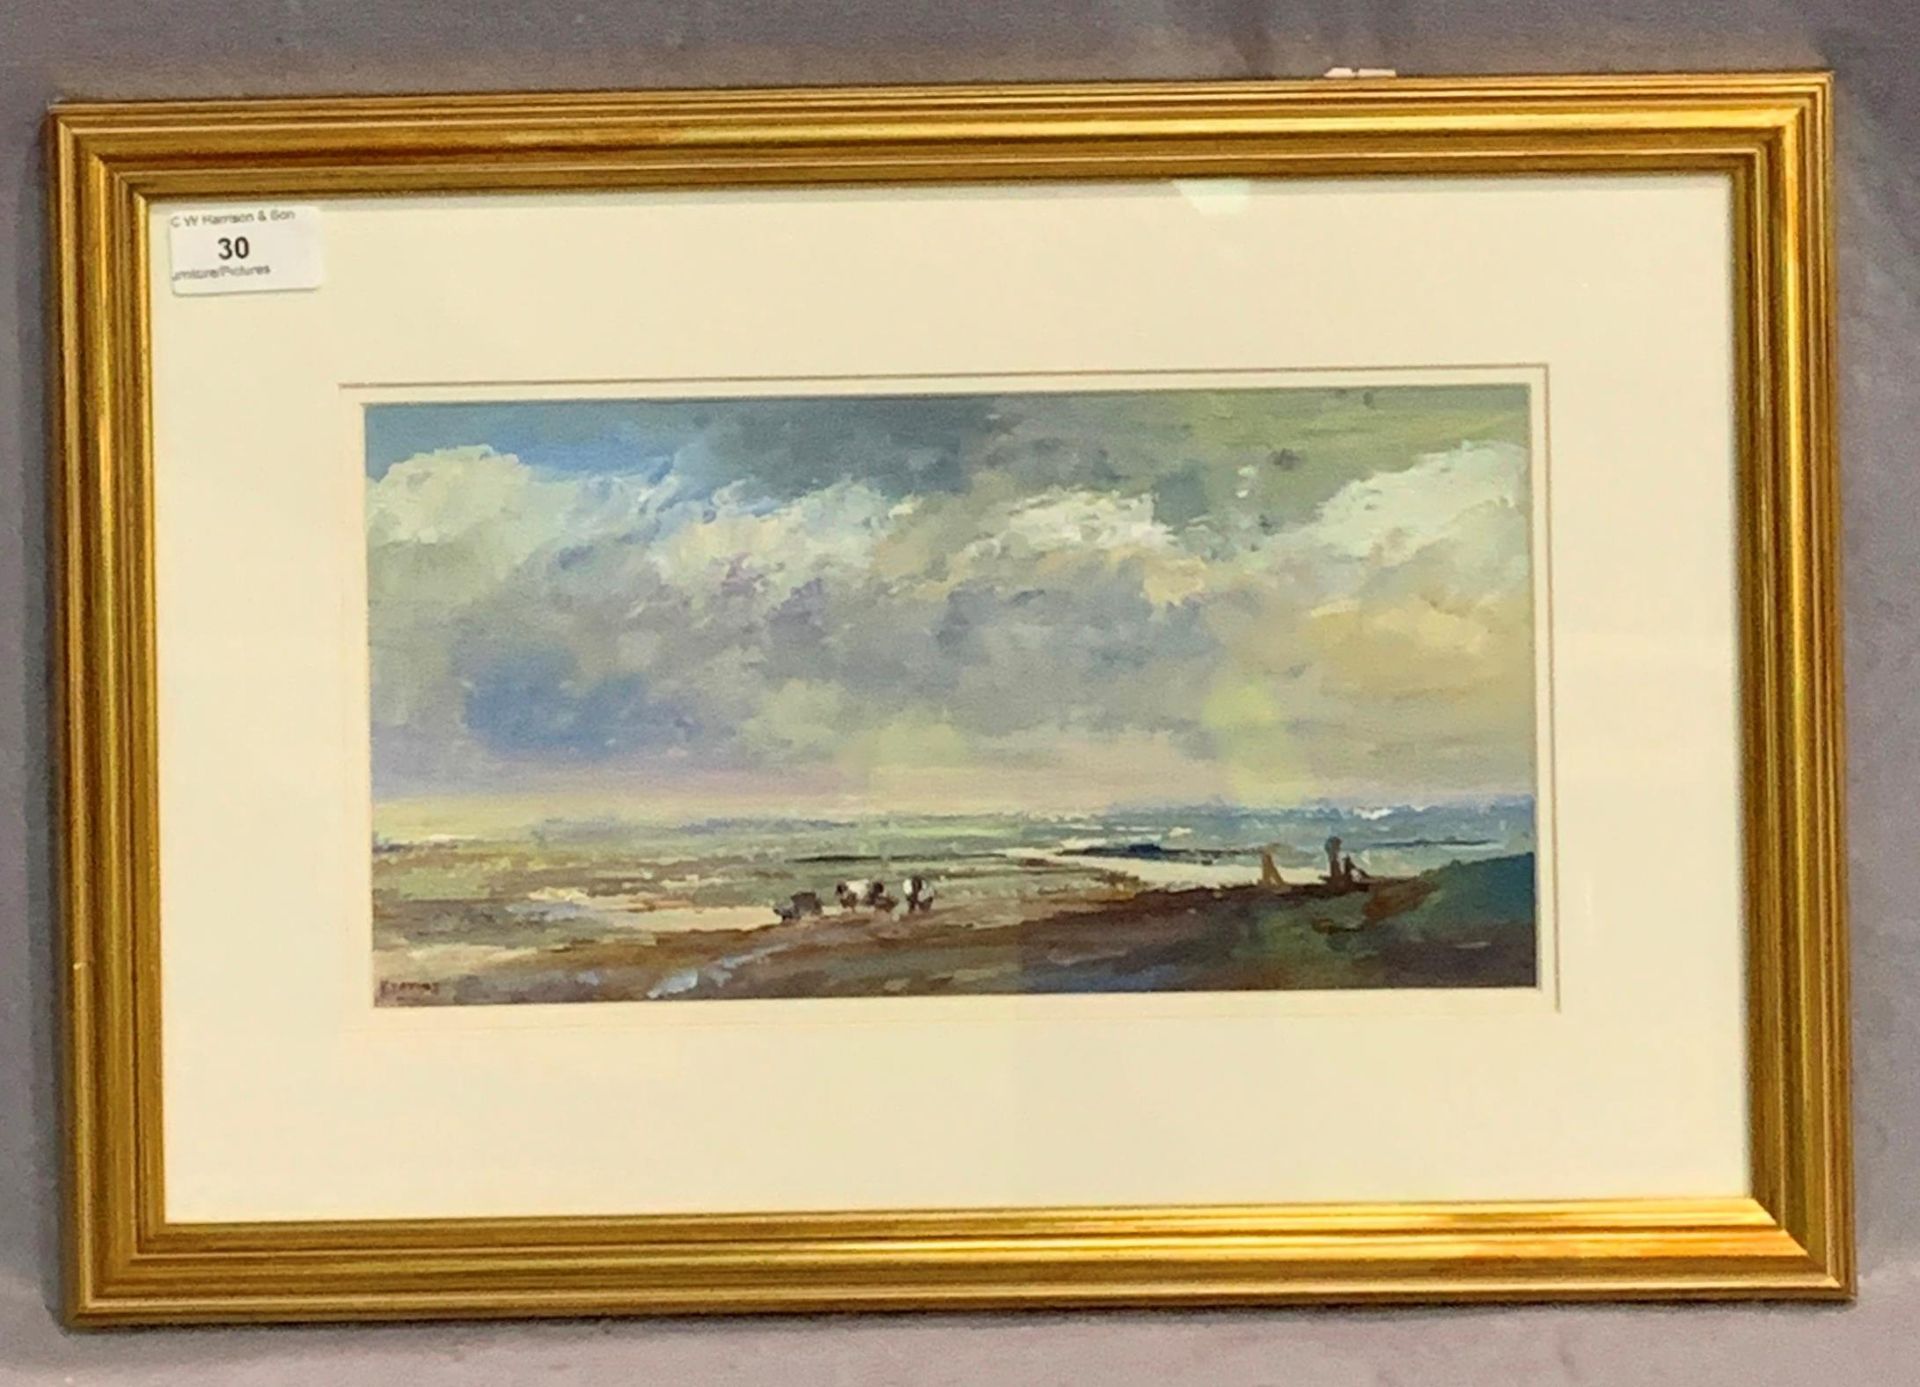 TOM KEATING after John Constable a framed oil painting 'Dedham Vale' 16 x 30cm with a certificate